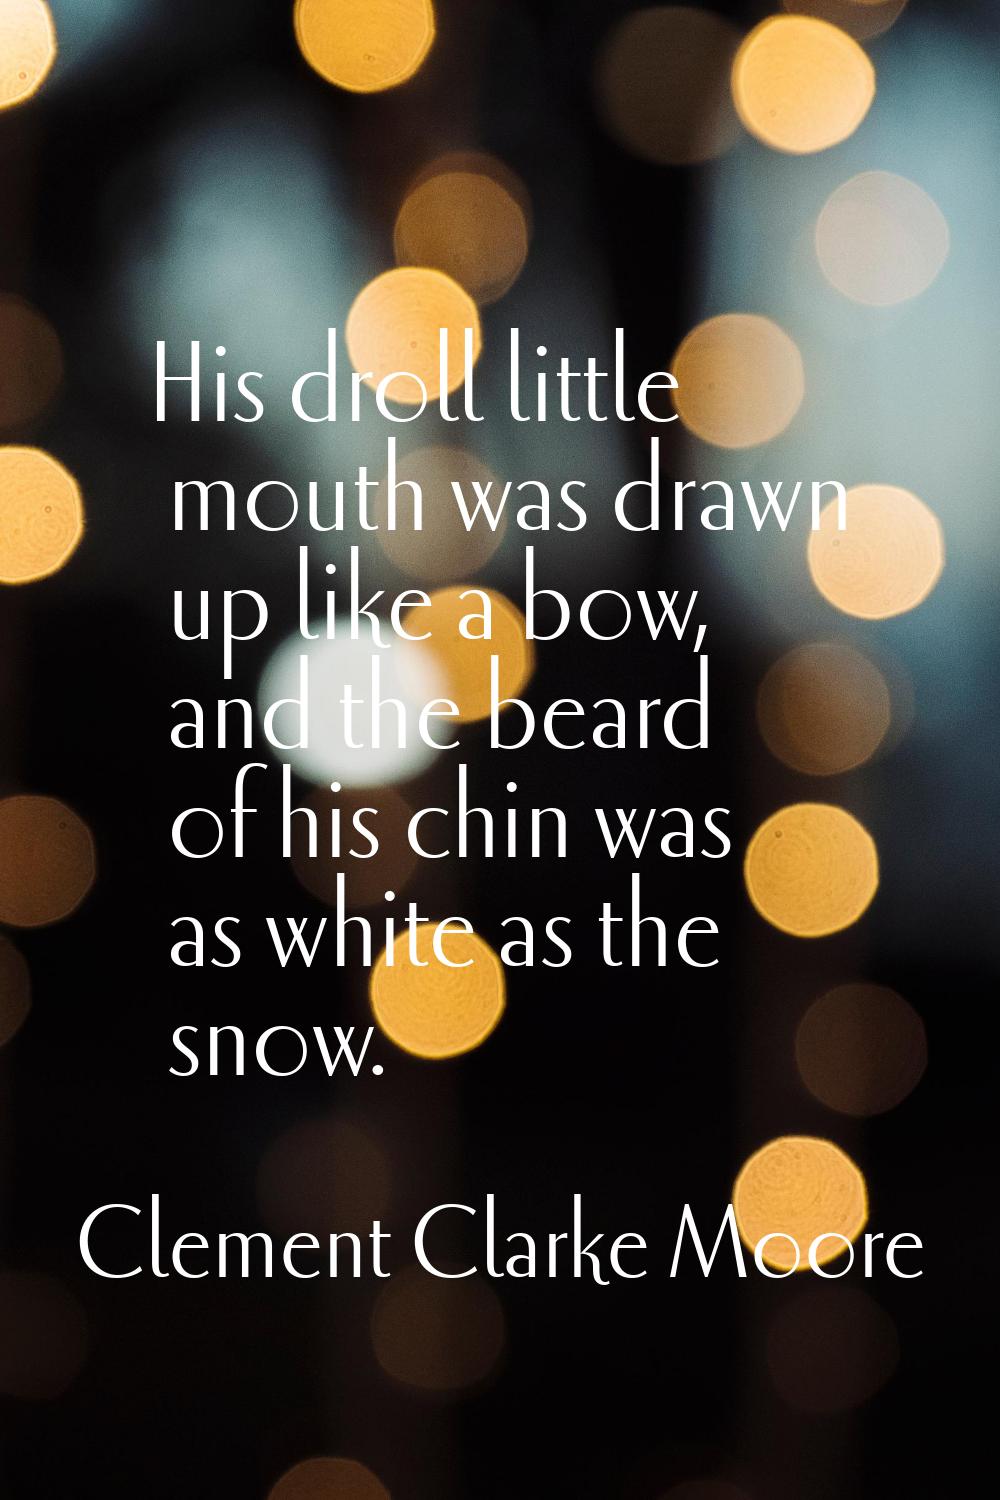 His droll little mouth was drawn up like a bow, and the beard of his chin was as white as the snow.